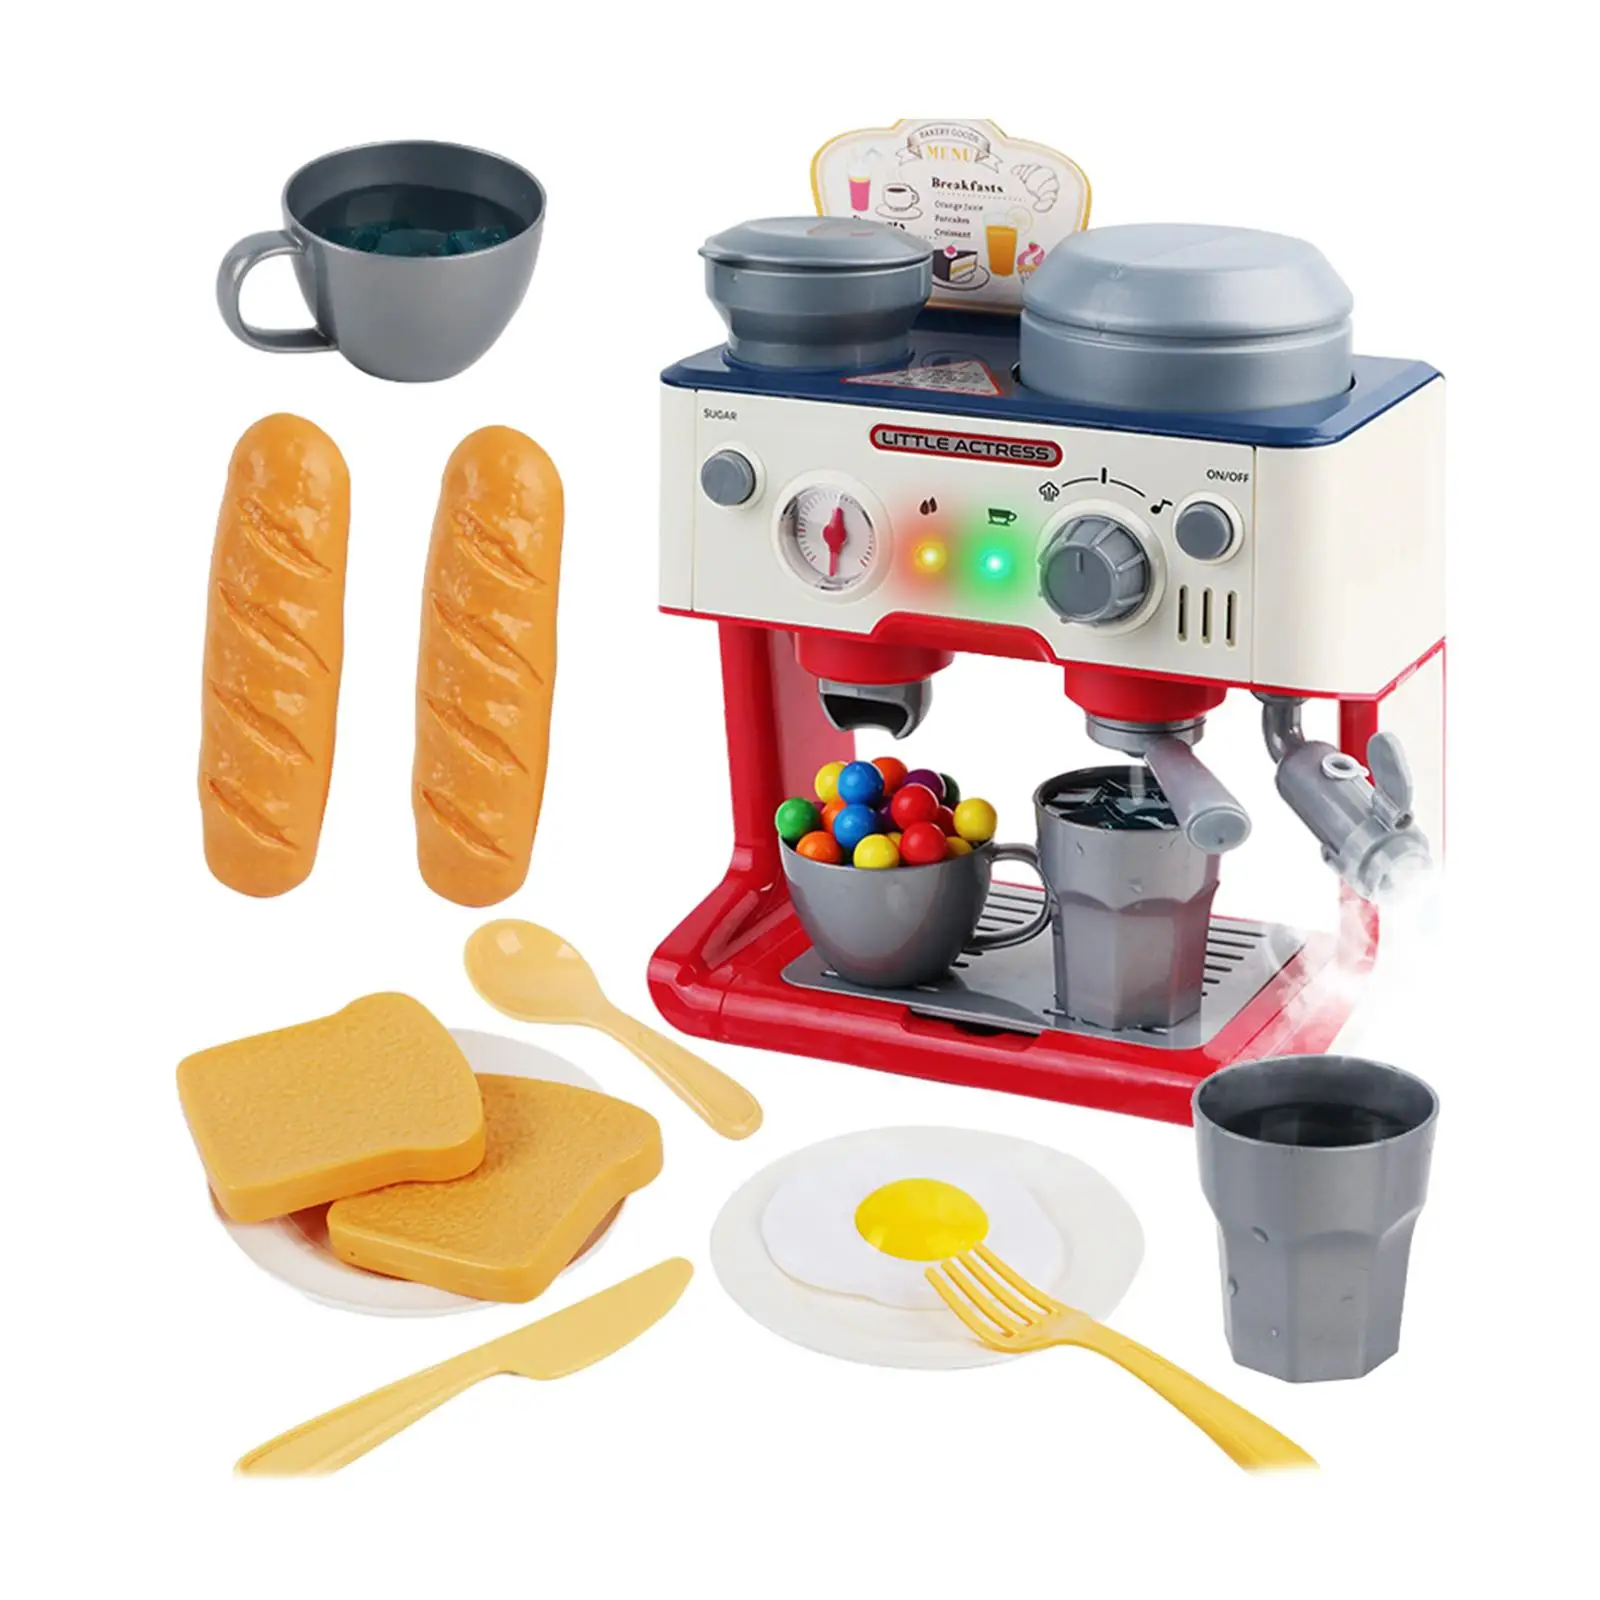 Simulation Coffee Maker Toys Develops Life Skills with Music Upgraded Toy Coffee Set for Kids Boys Children Girls Birthday Gifts